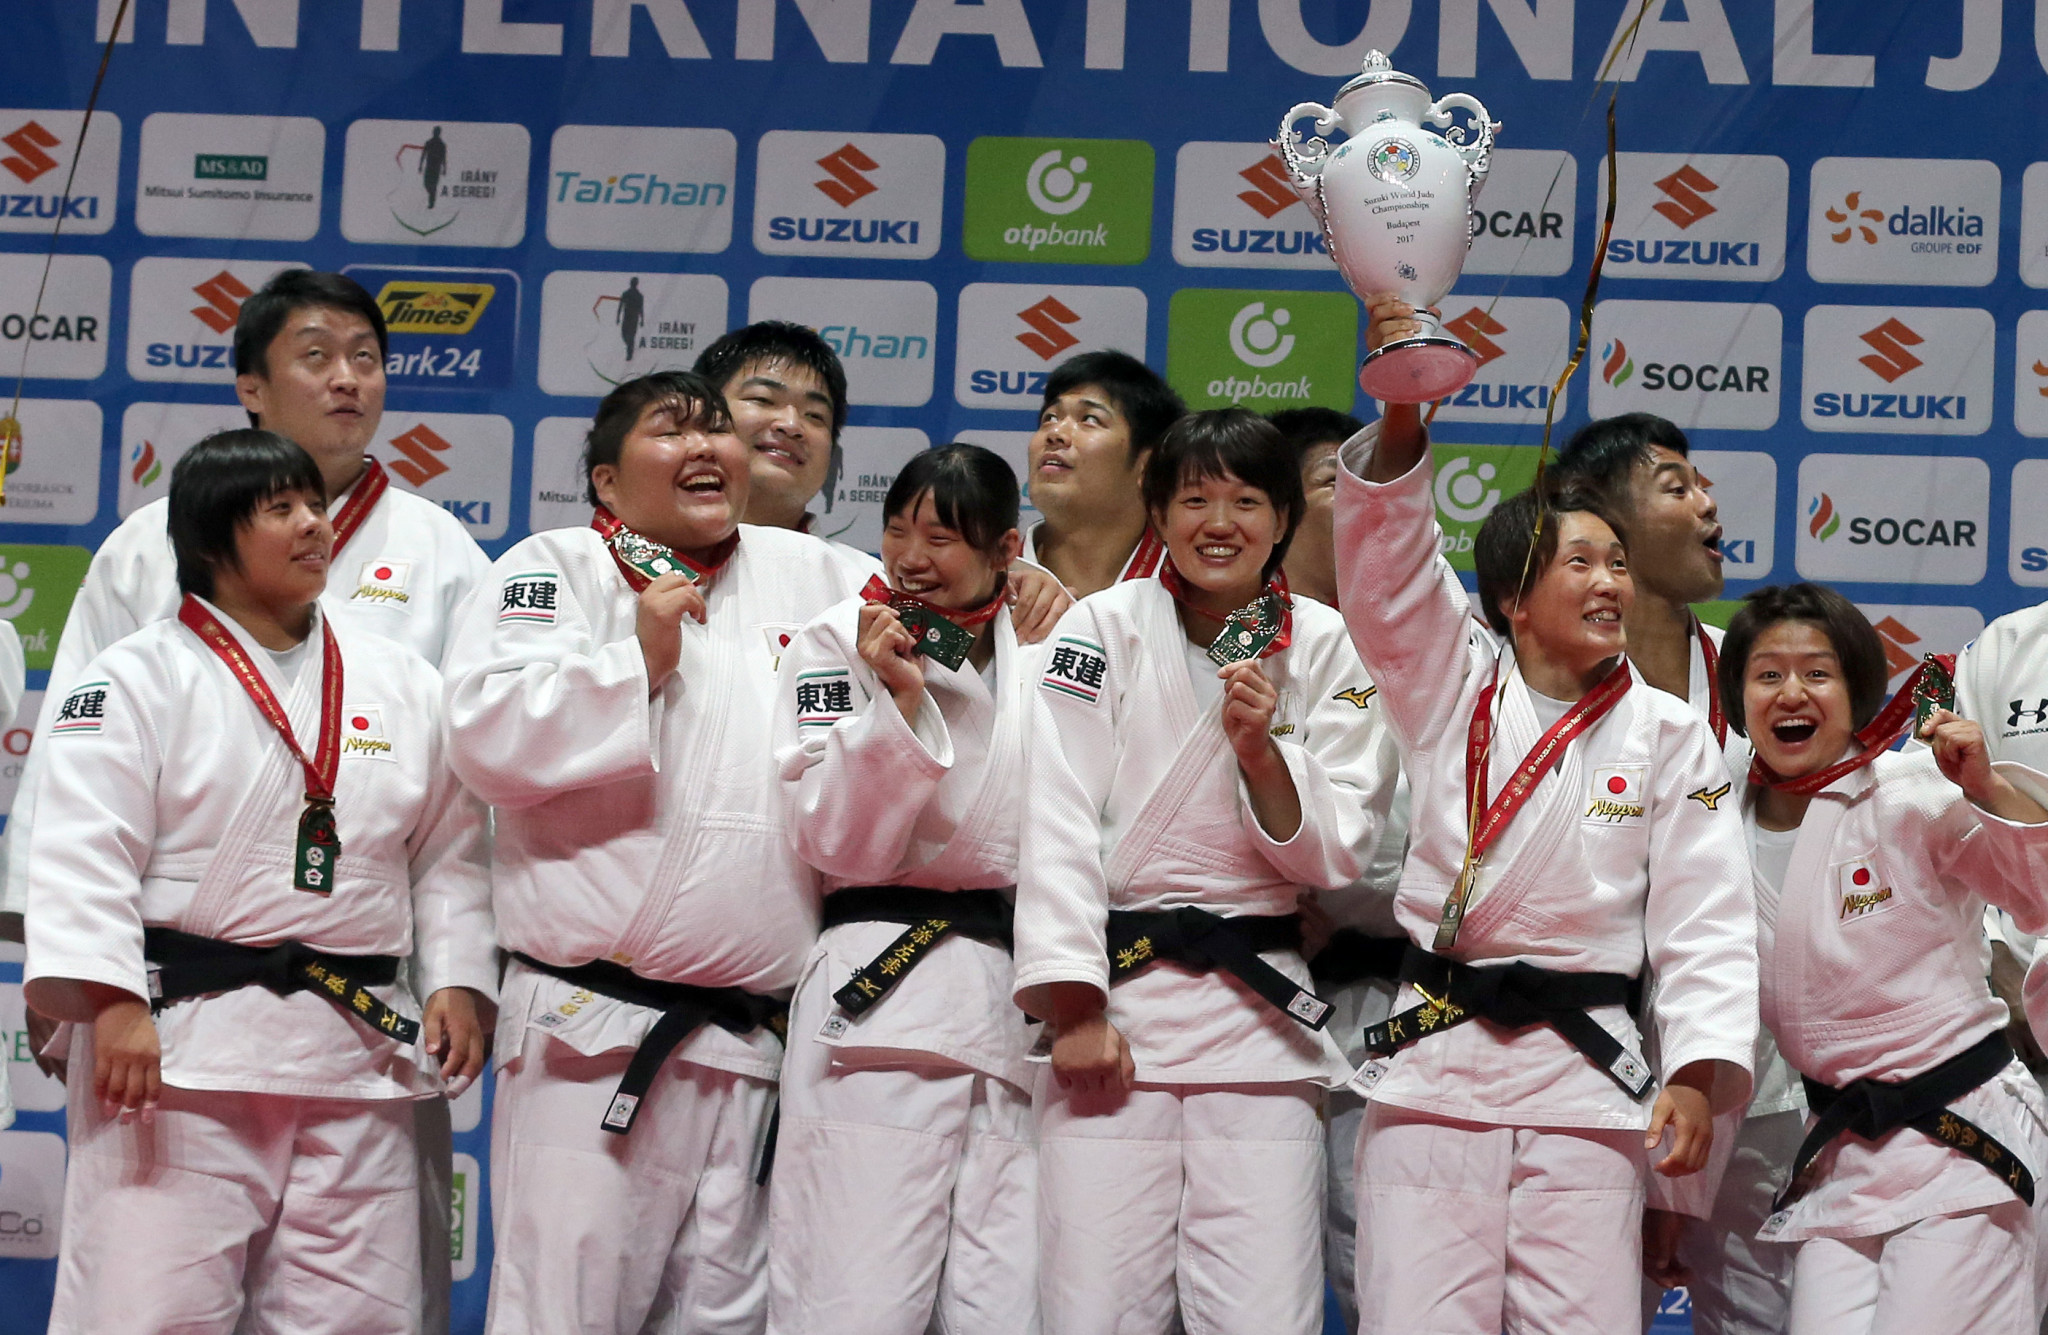 Japan capped off a dominant performance at these Championships by winning the team title ©Getty Images